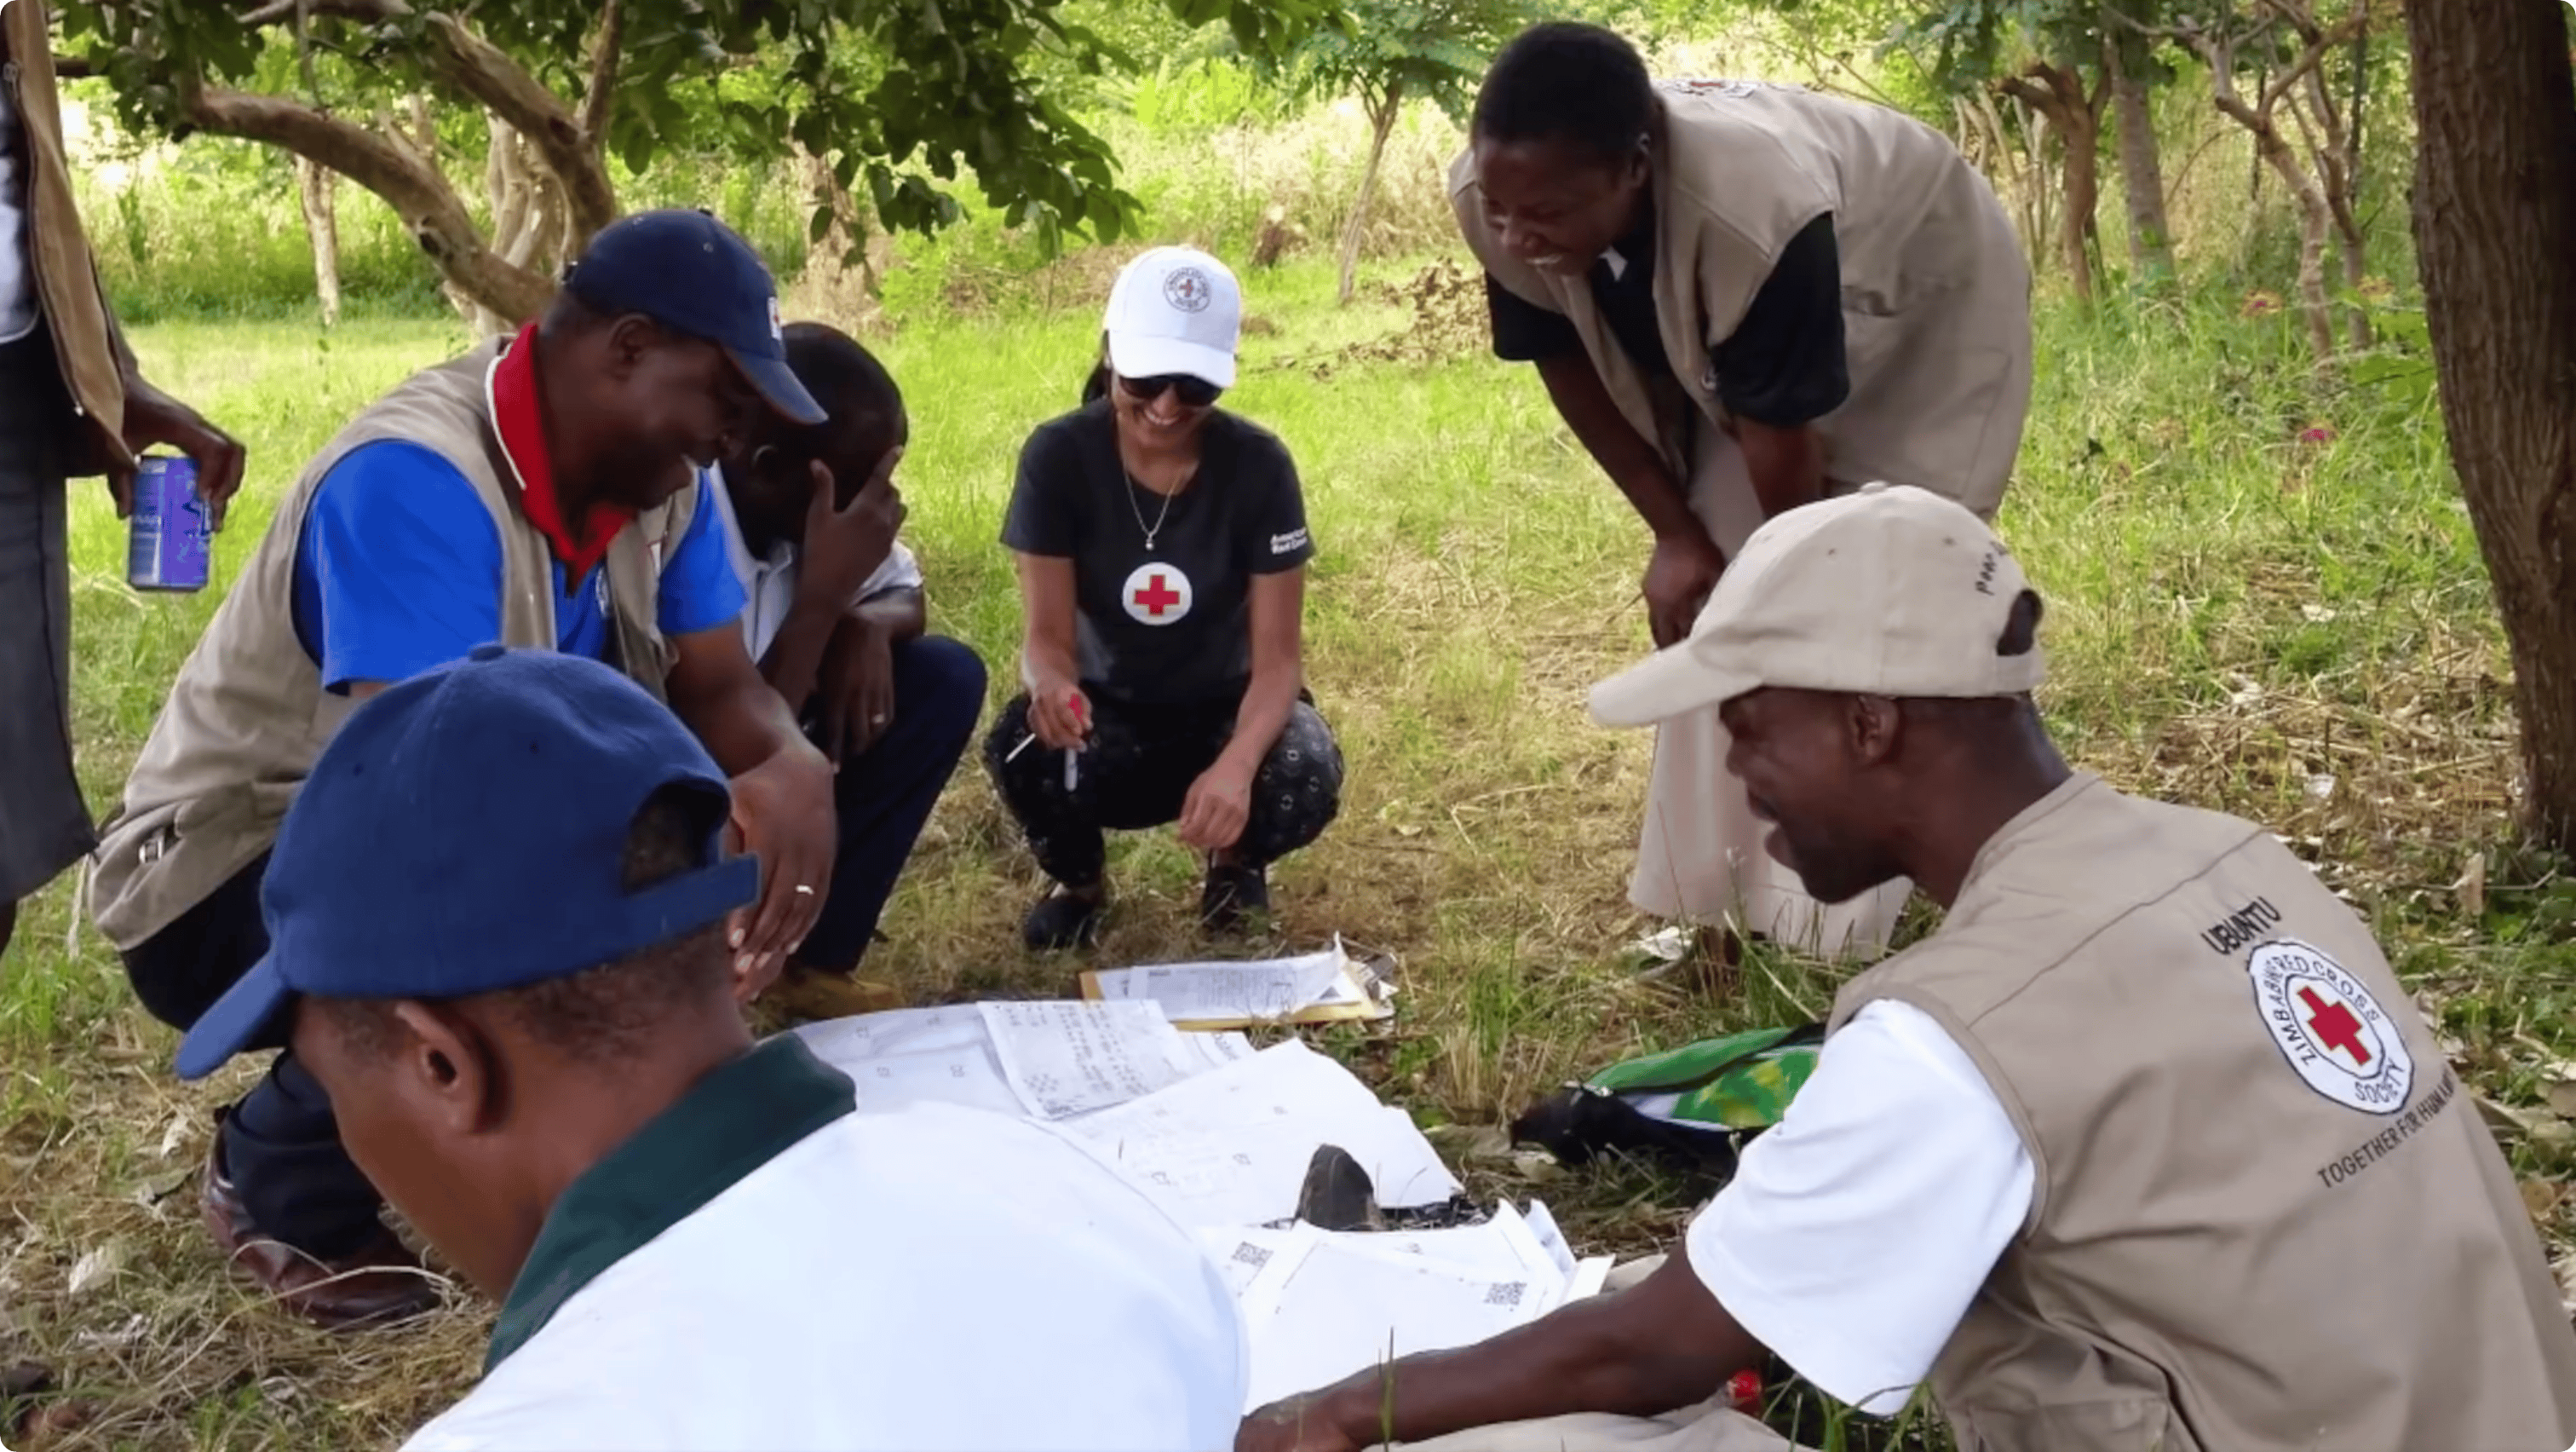 Workers from the Red Cross humanitarian mission have spread papers with local area research on the ground and are discussing them